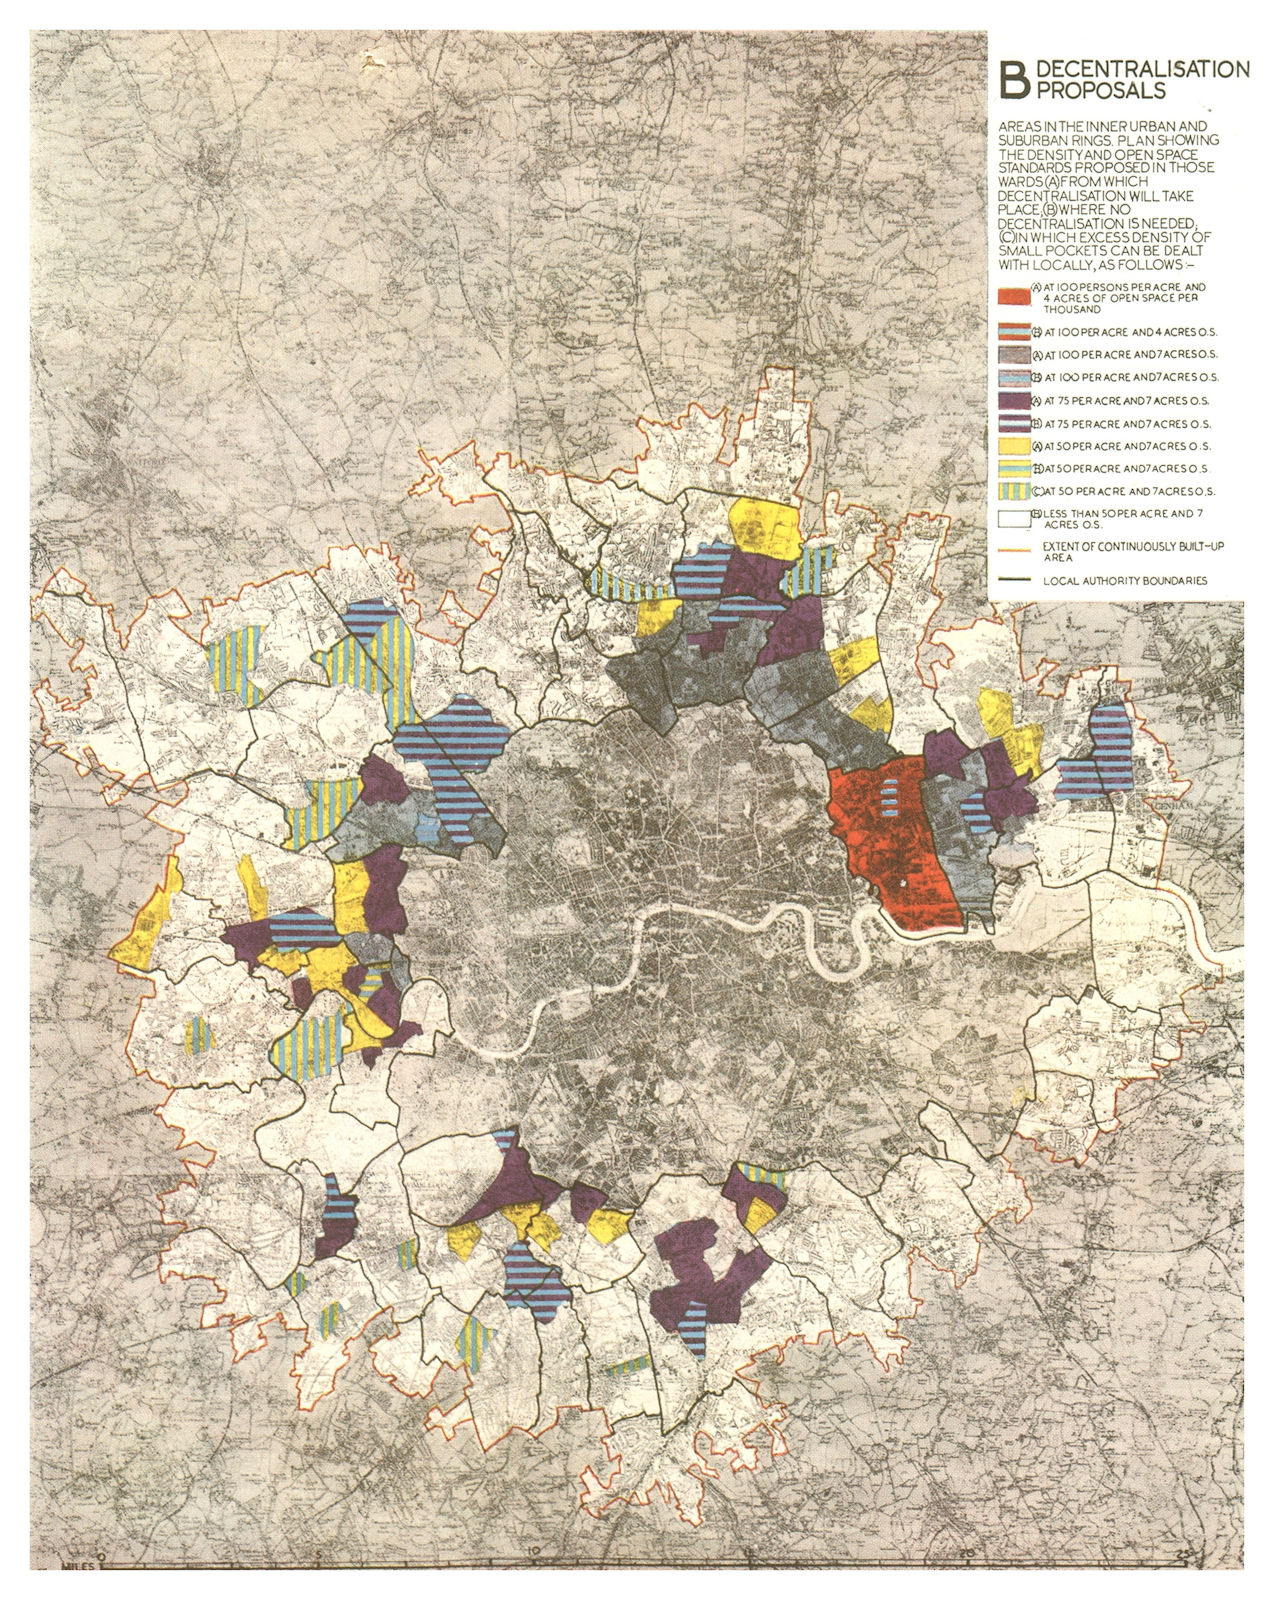 GREATER LONDON PLAN.Proposed density post decentralisation.ABERCROMBIE 1944 map